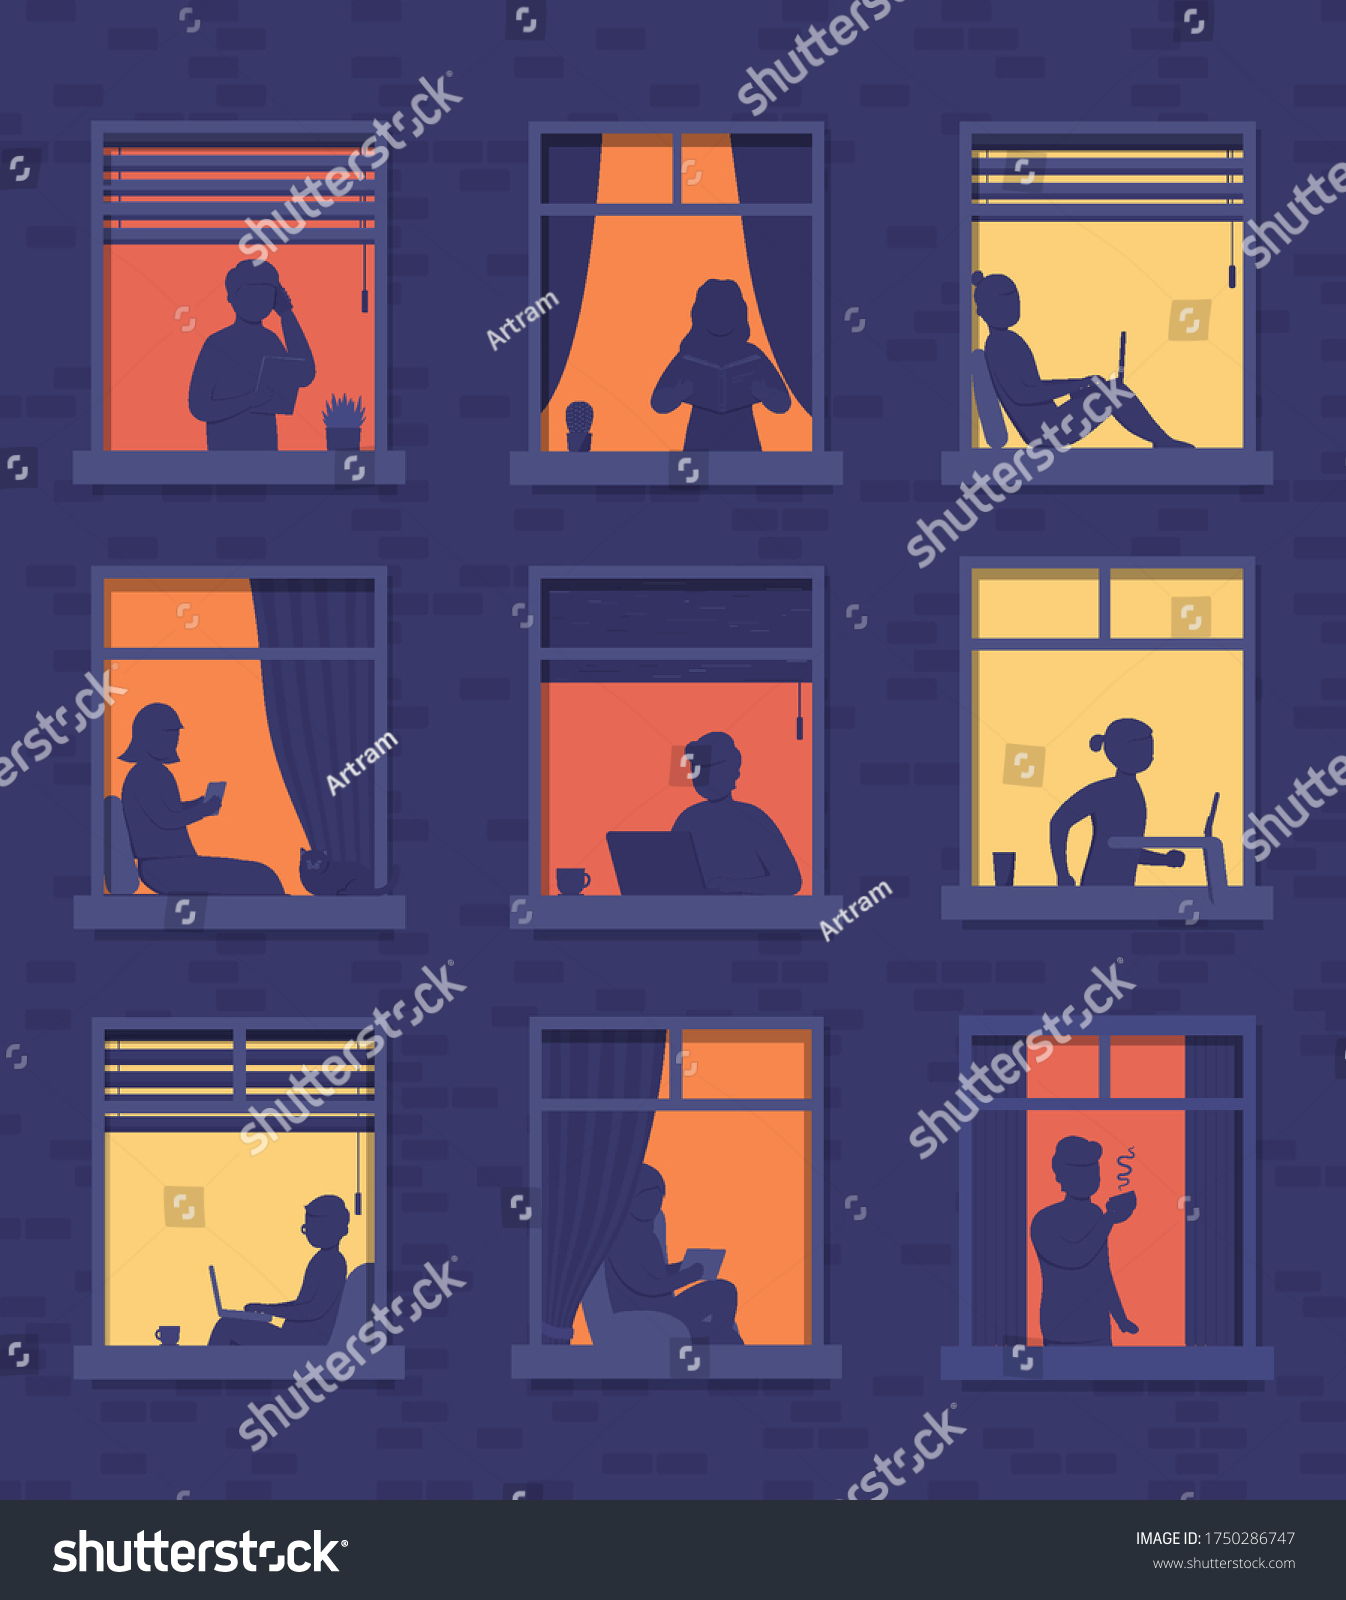 50,804 Reading pose Images, Stock Photos & Vectors | Shutterstock